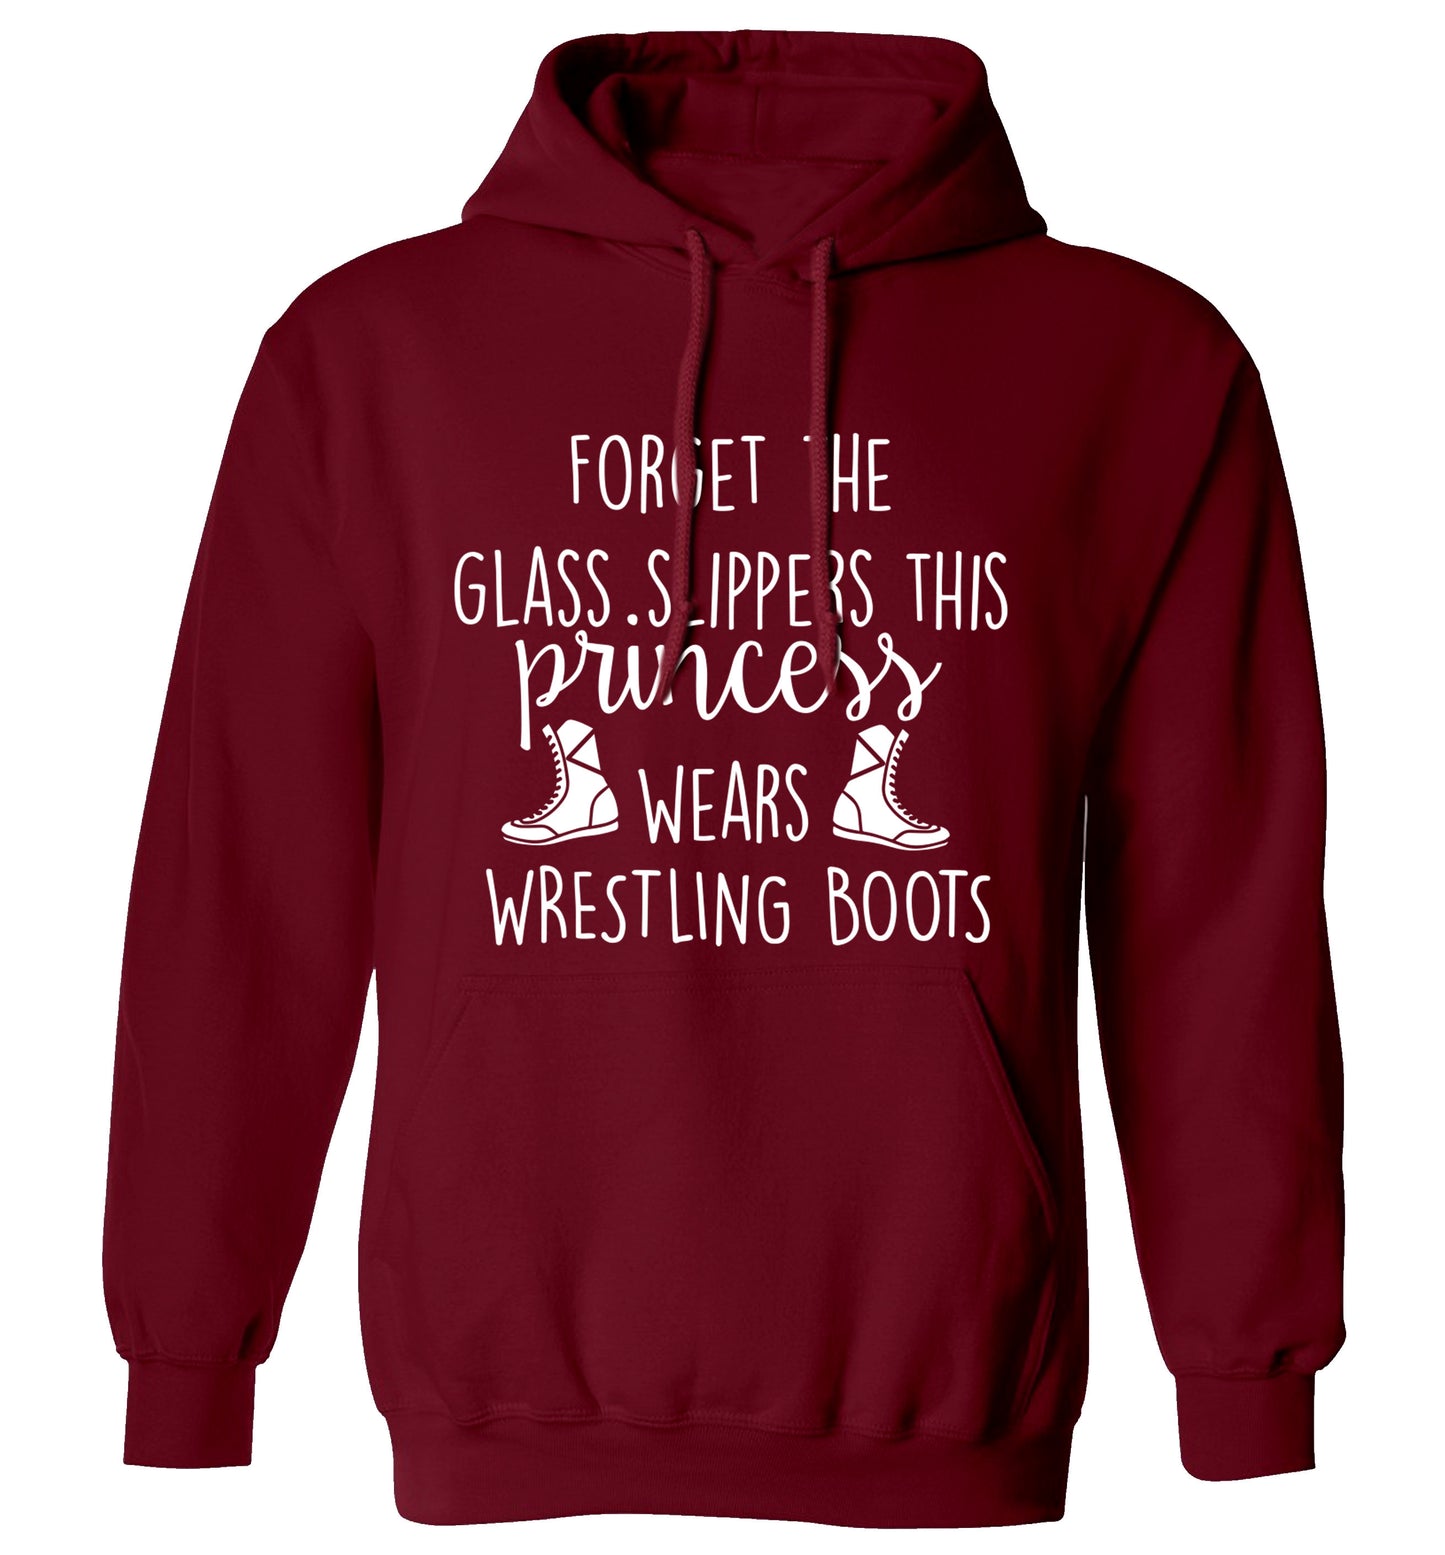 Forget the glass slippers this princess wears wrestling boots adults unisex maroon hoodie 2XL